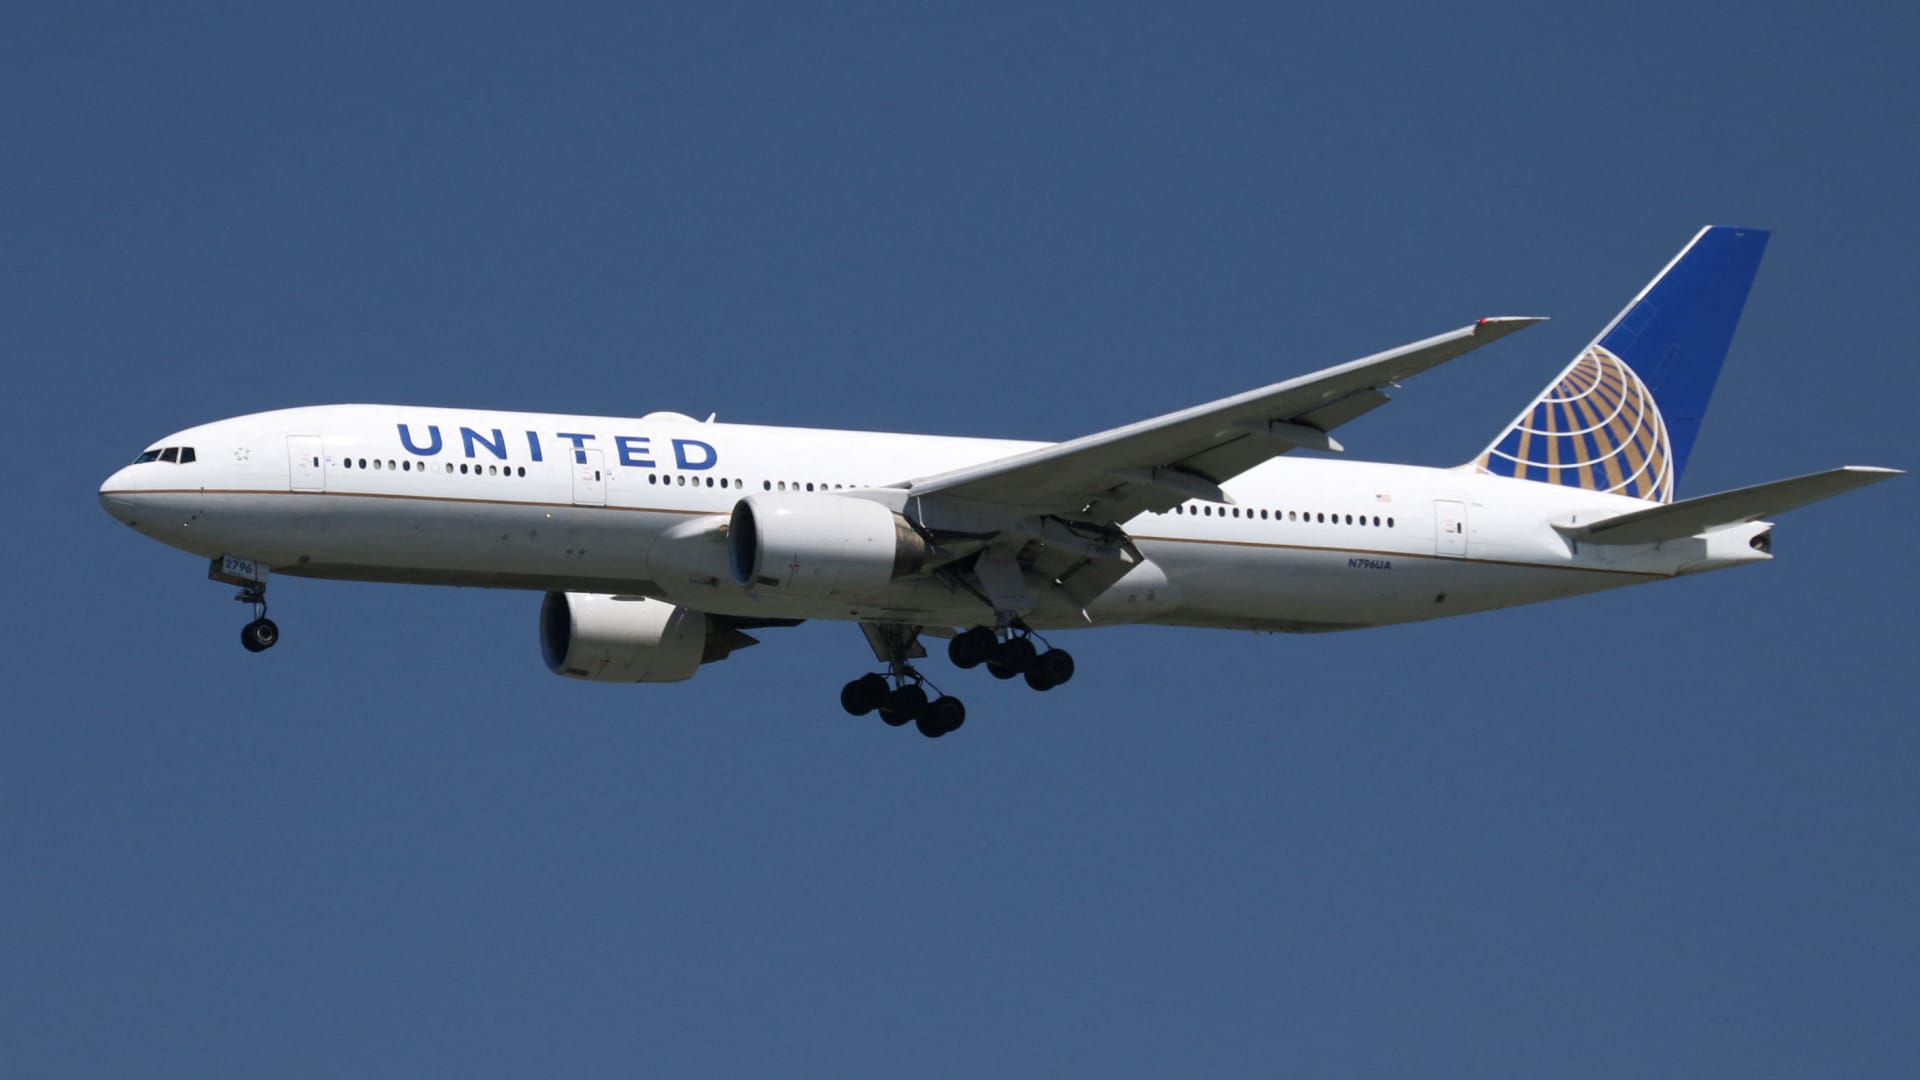 United Airlines gives pilots 5% raises early